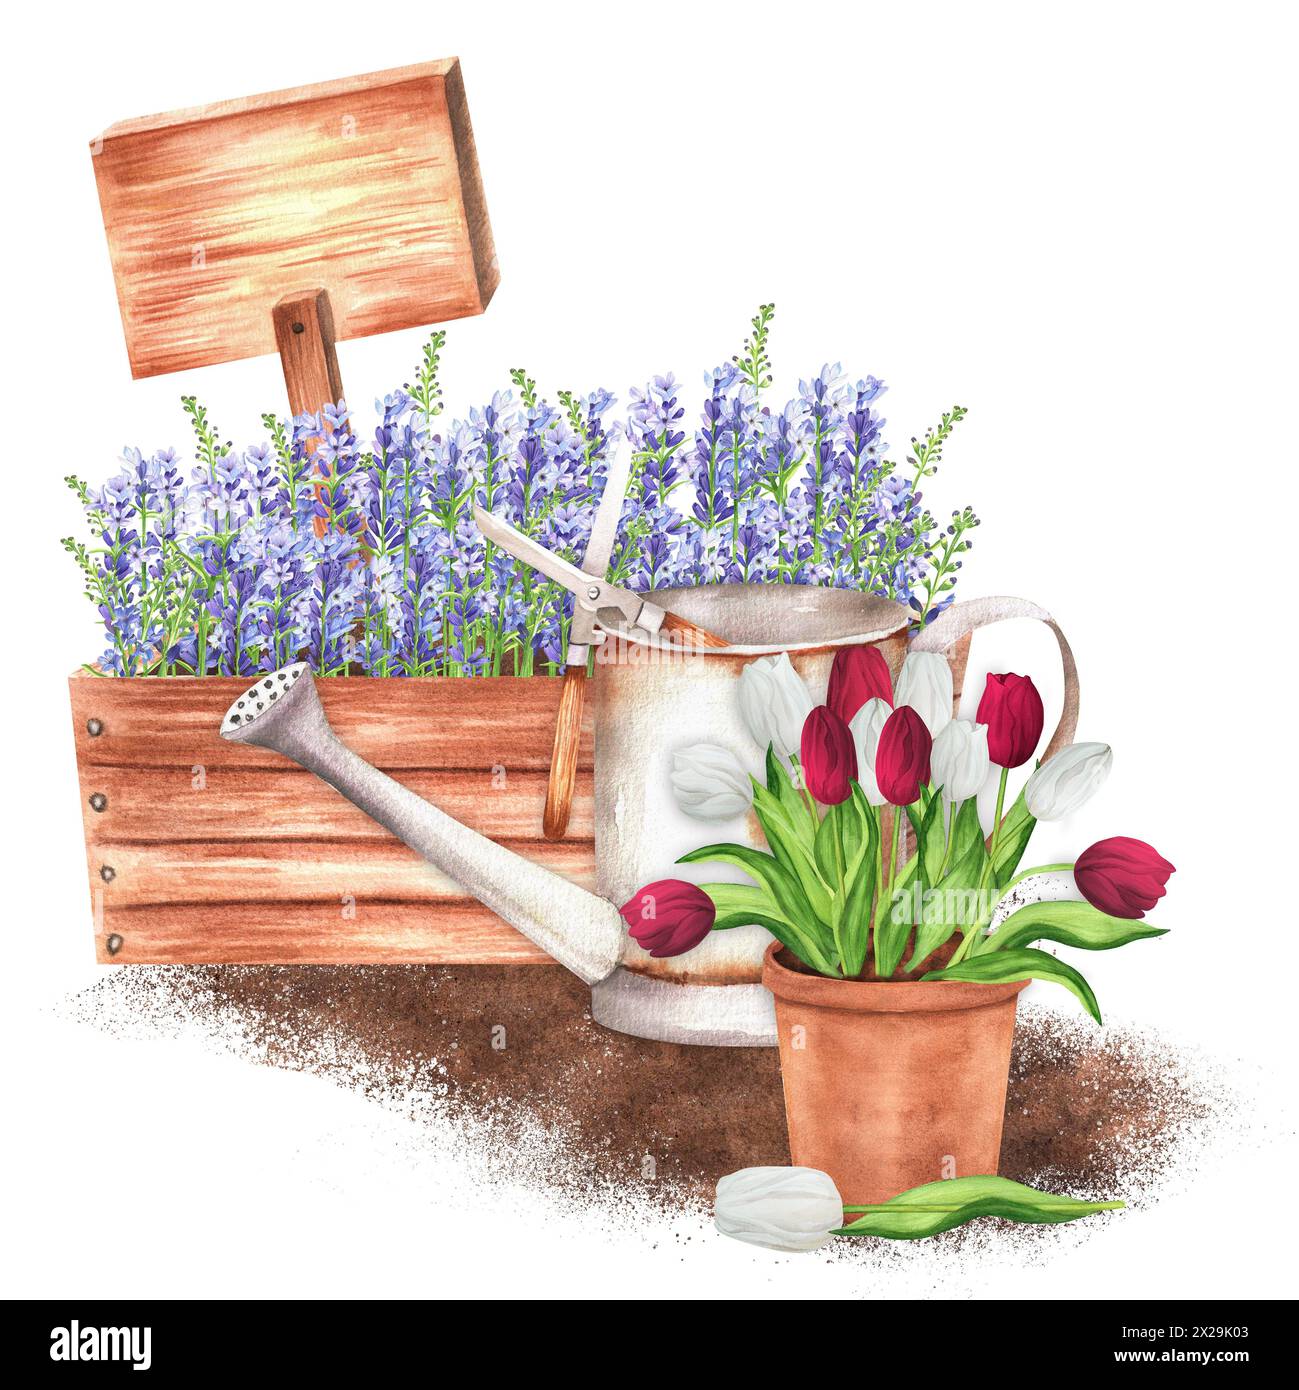 Hand-drawn watercolor illustration. Rustic scene with wooden crate with lavender, a terracotta flowerpot with white and red tulips, watering can and w Stock Photo